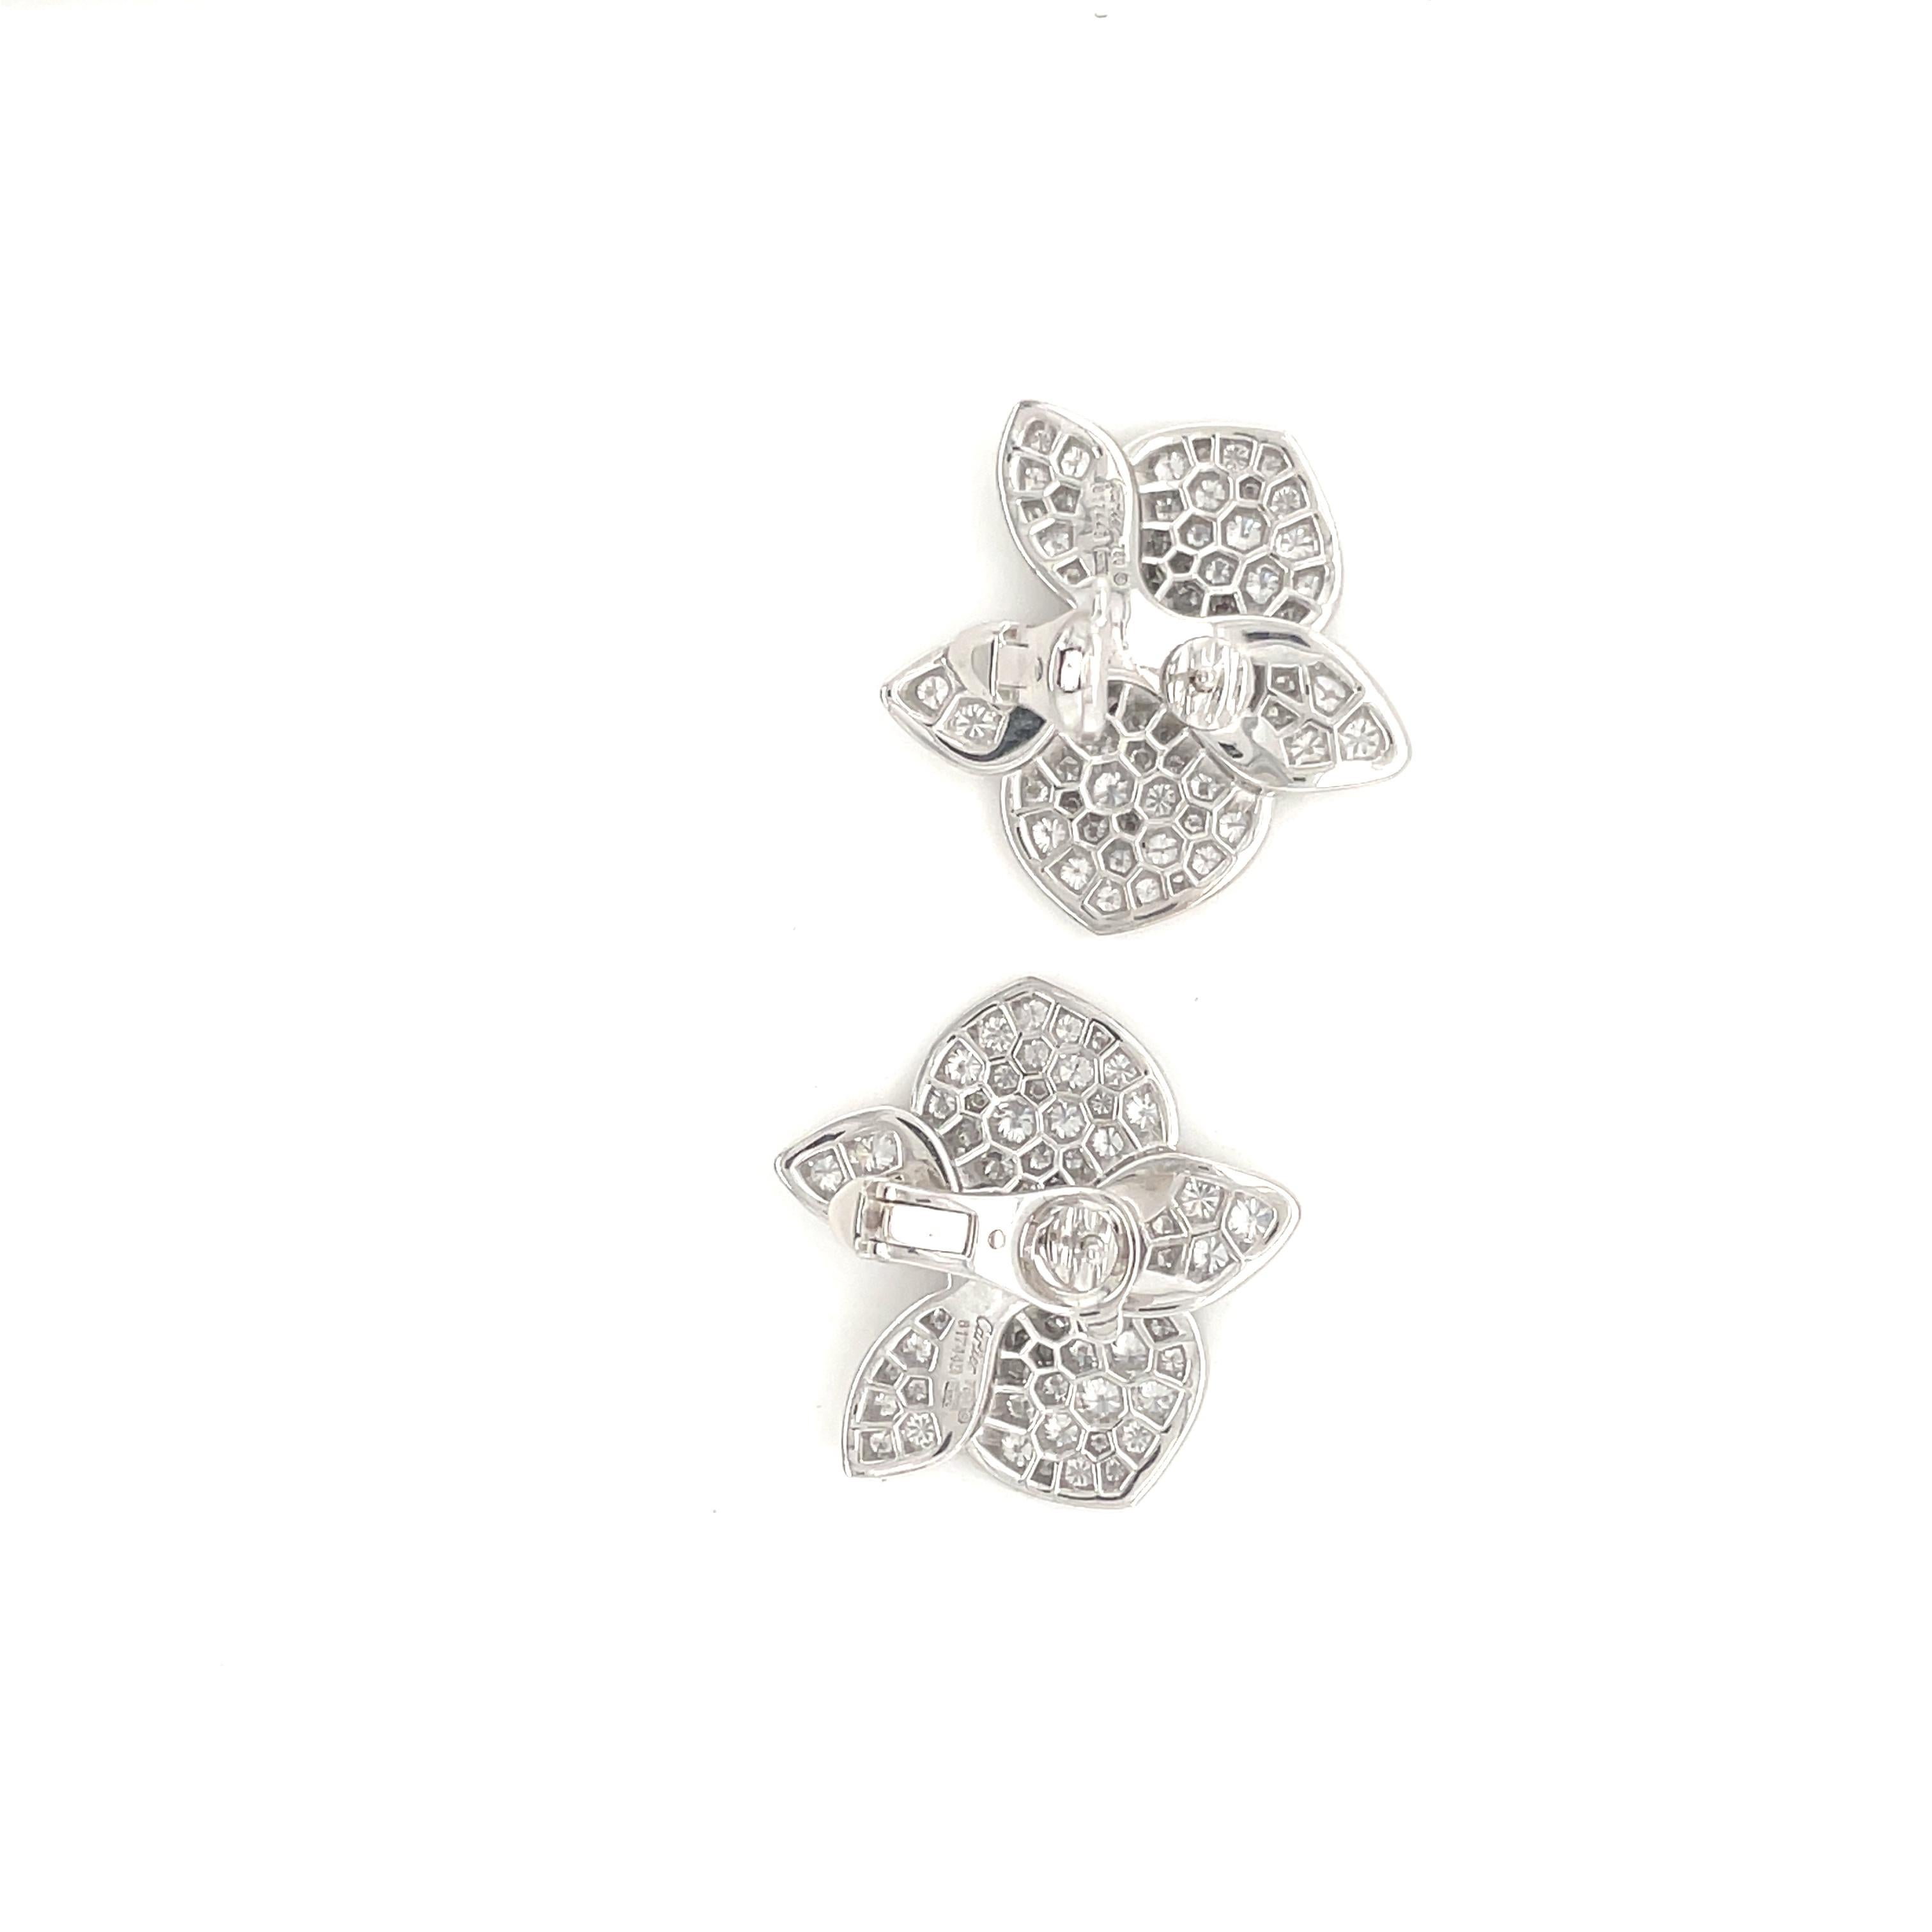 Stunning Cartier Caresse d' Orchidees White Gold and Diamond LARGE size earrings with certification papers. 2.89ctw F VVS, comes with box and certification papers. These earrings are for pierced ears. Stamped Cartier 750